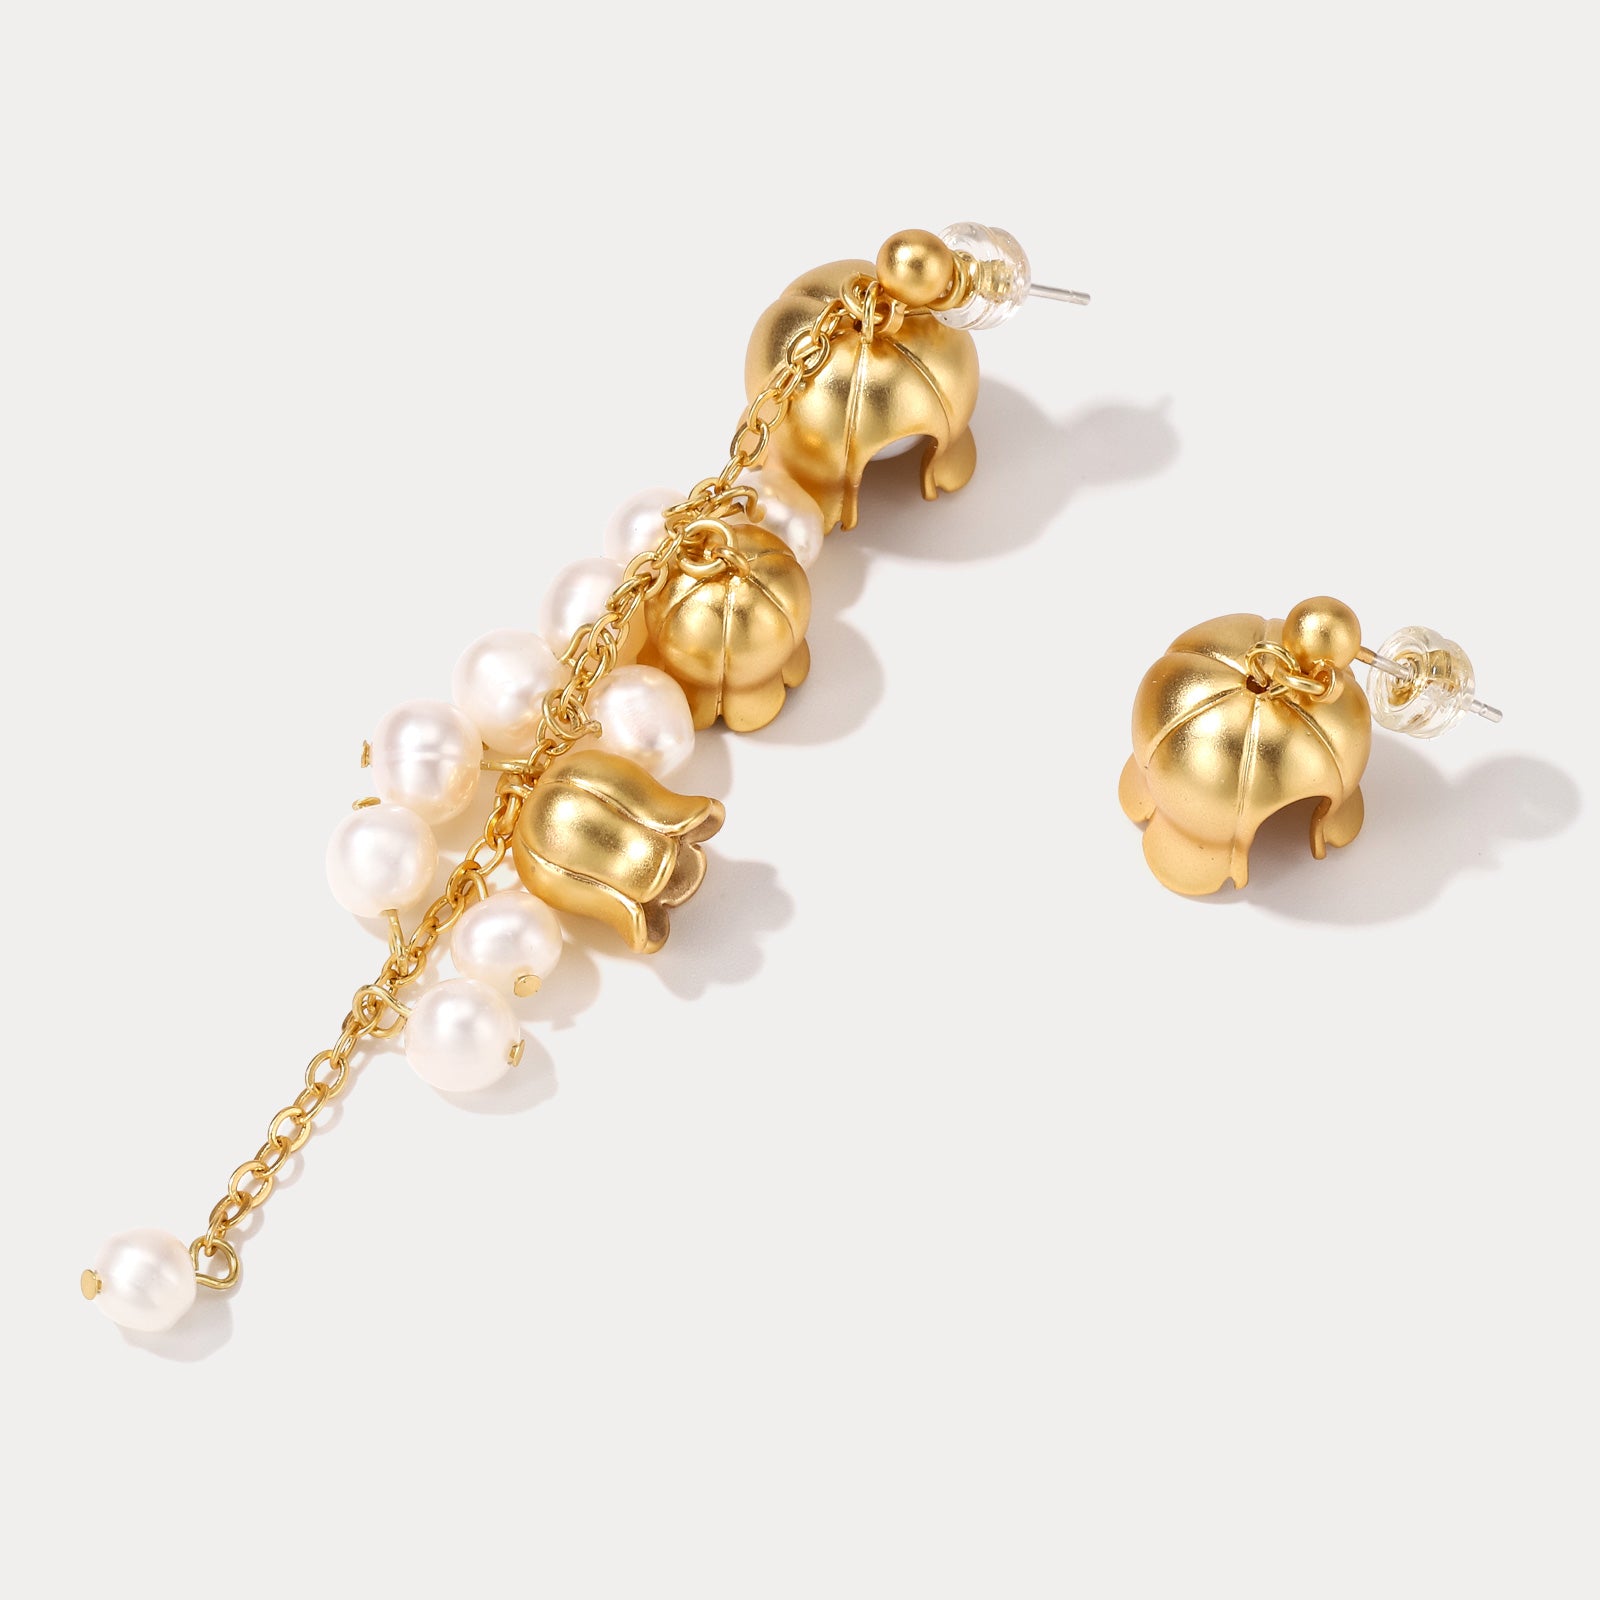 Vintage Lily Of The Valley Pearl Earrings